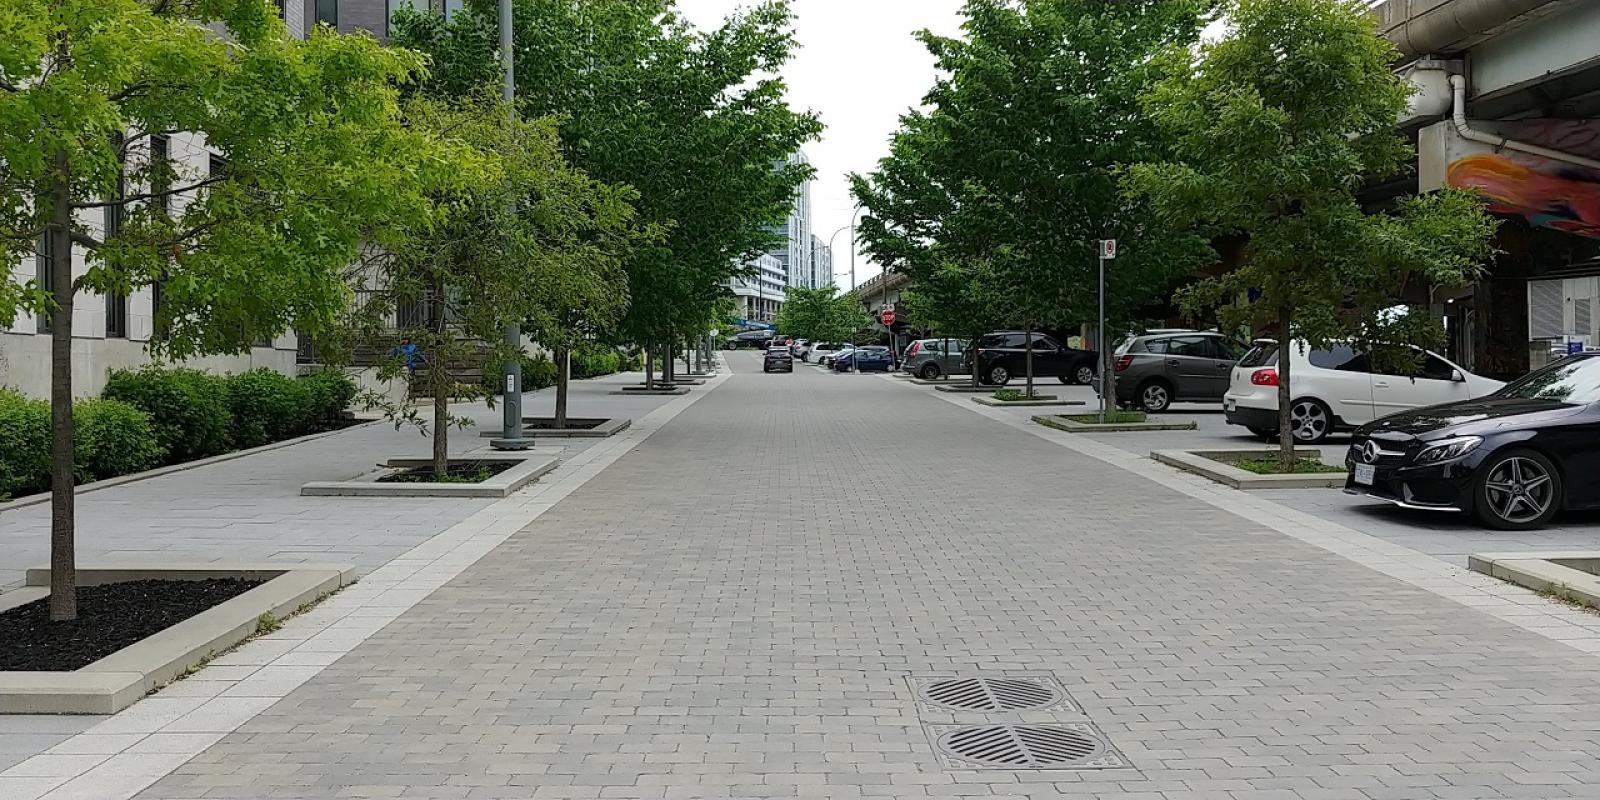 a photo showing a street with the road, sidewalk and trees